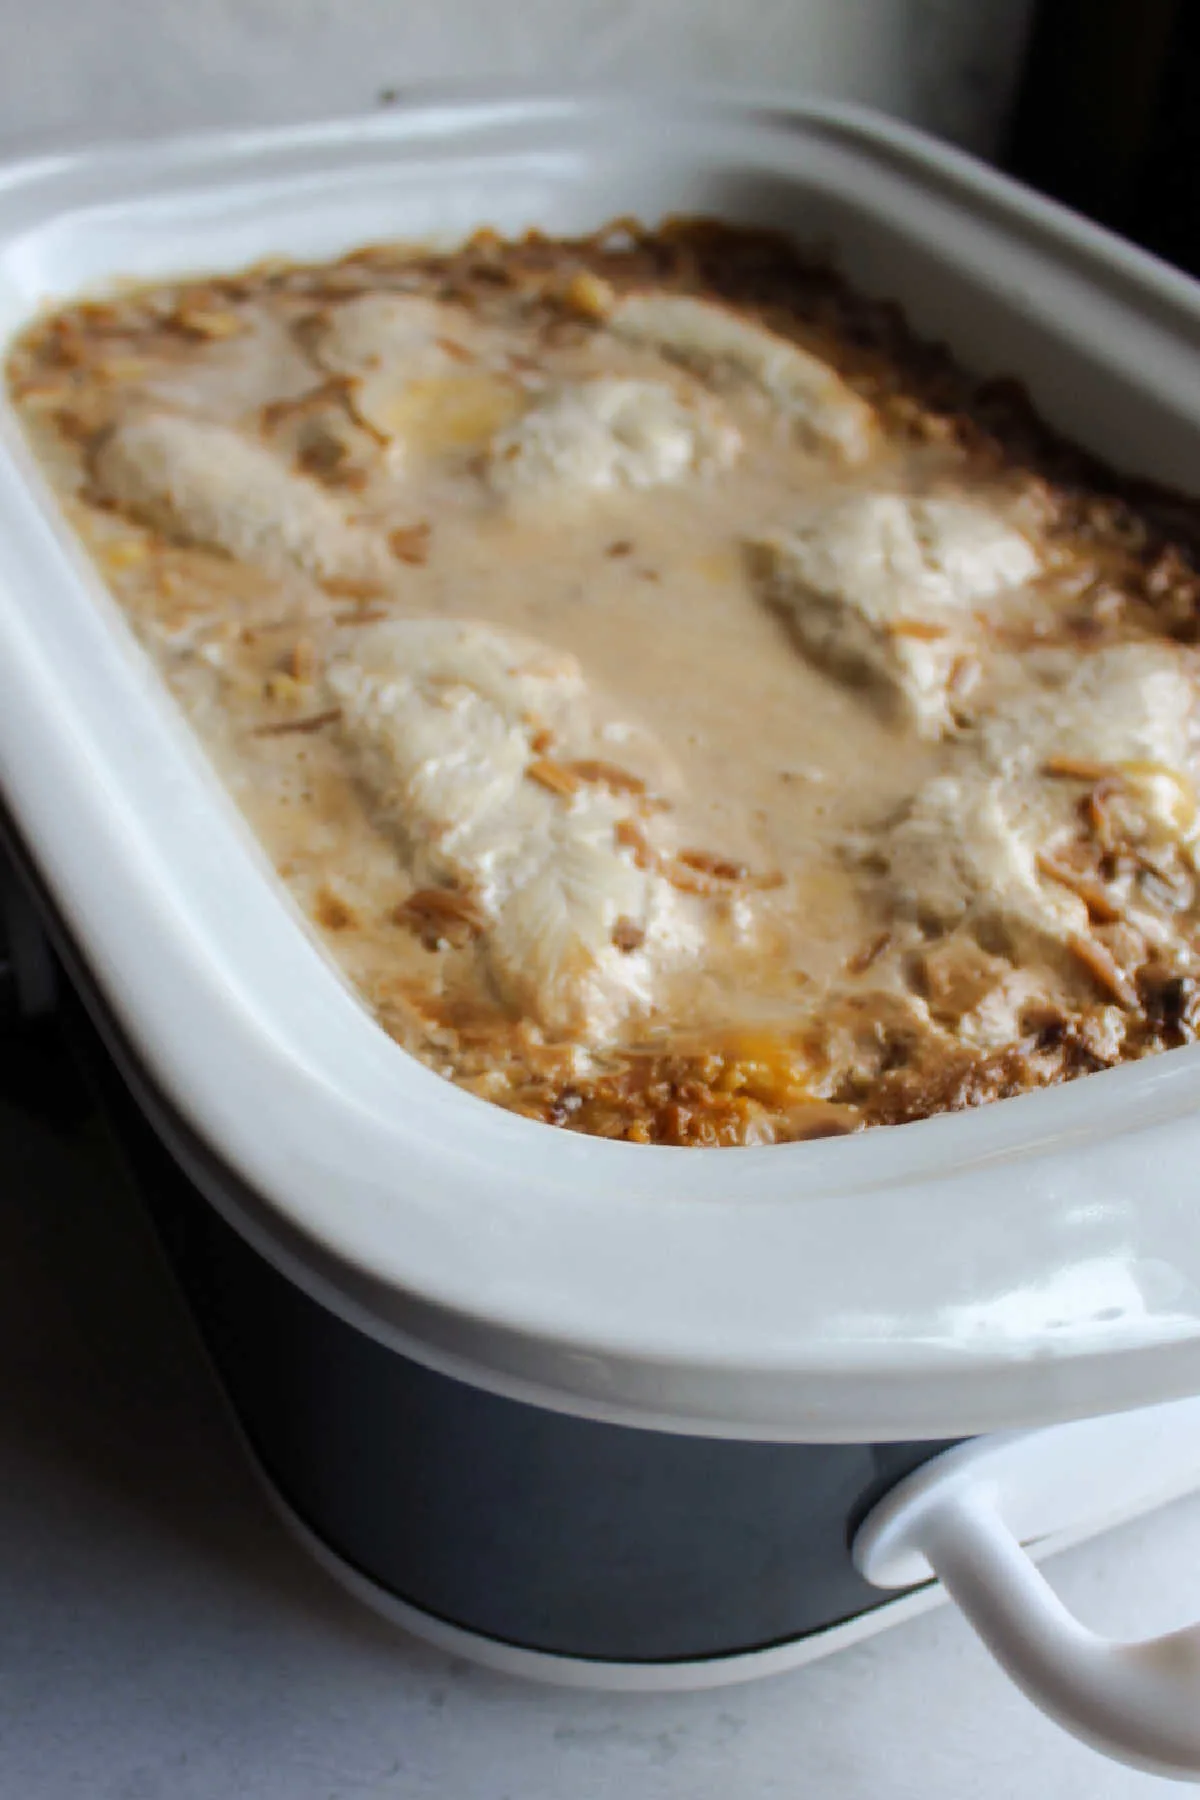 Cook chicken and creamy rice in crockpot, ready to serve.